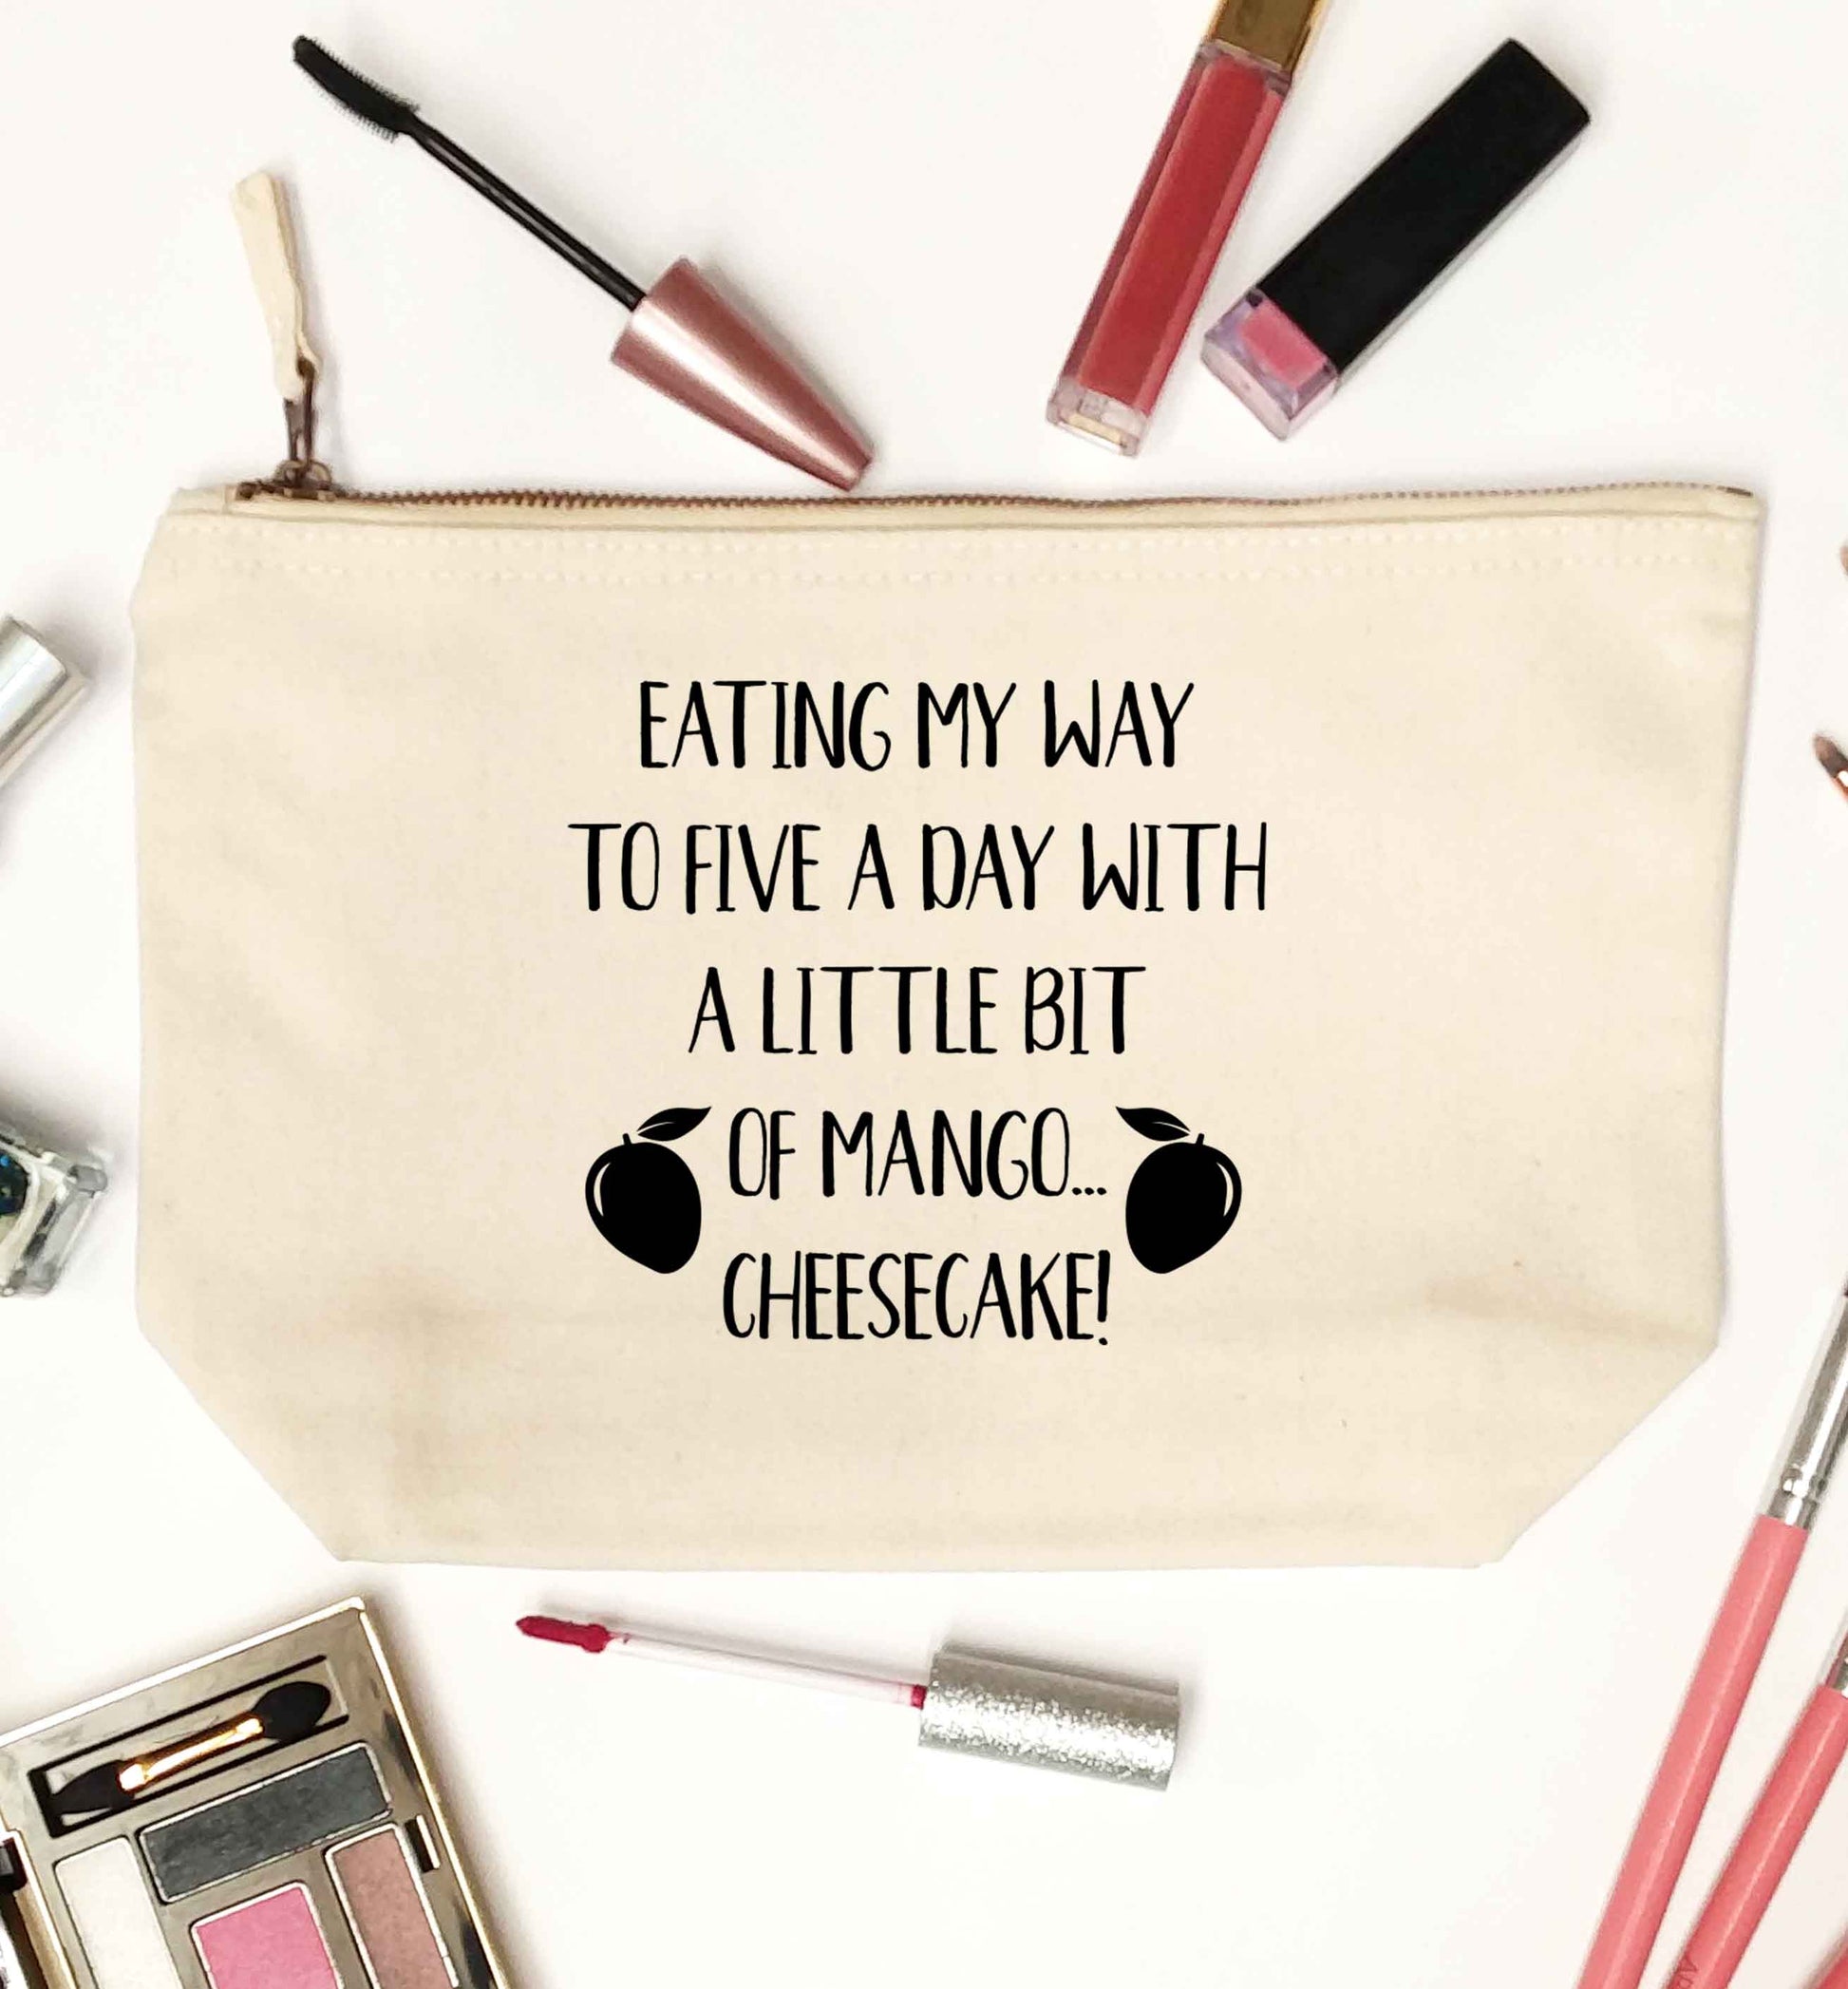 Eating my way to five a day with a little bit of mango cheesecake natural makeup bag